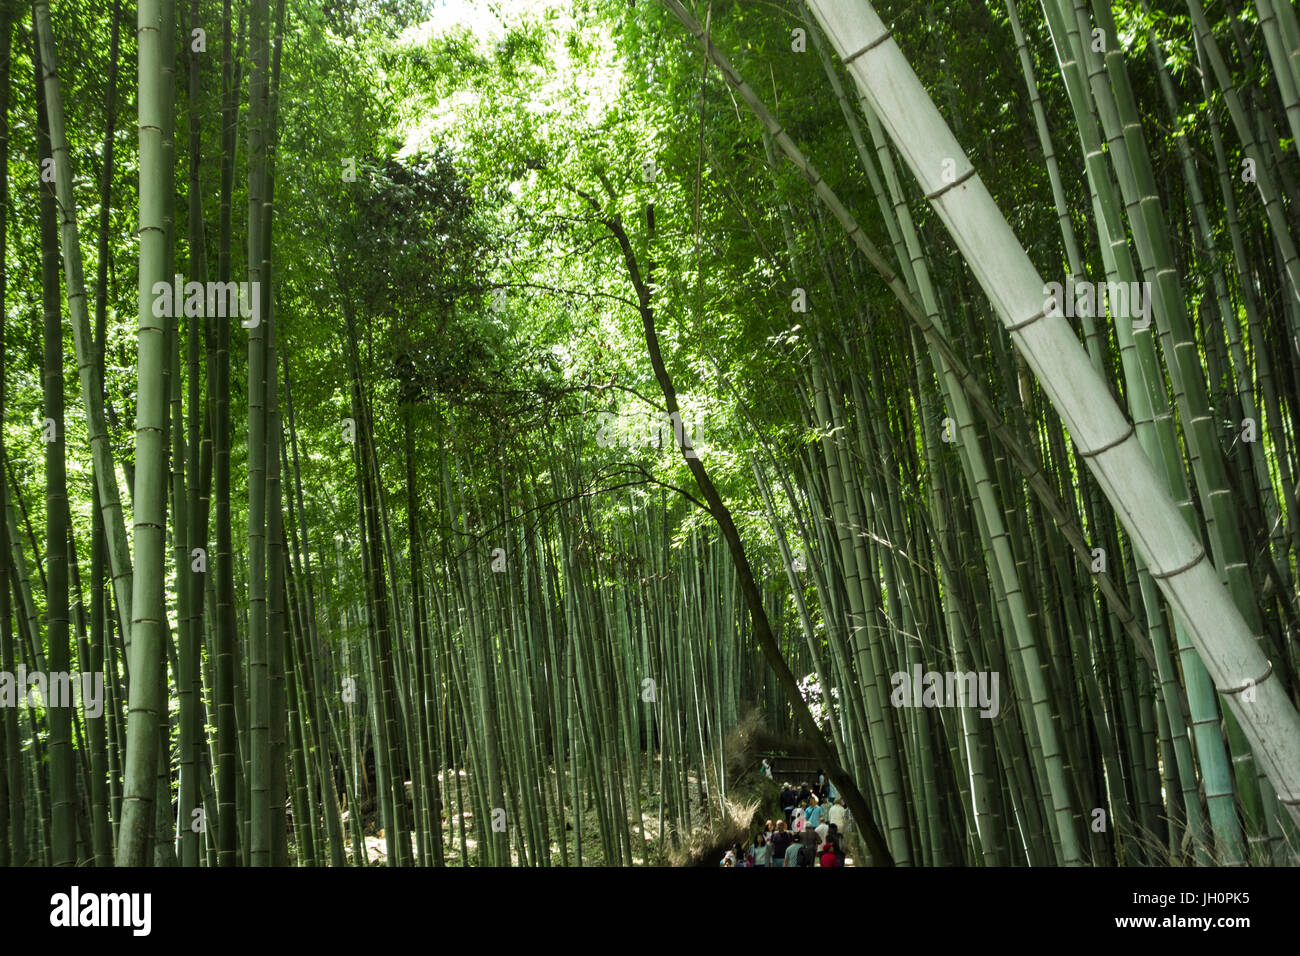 Giant bamboo, grove, forest Kyoto Stock Photo